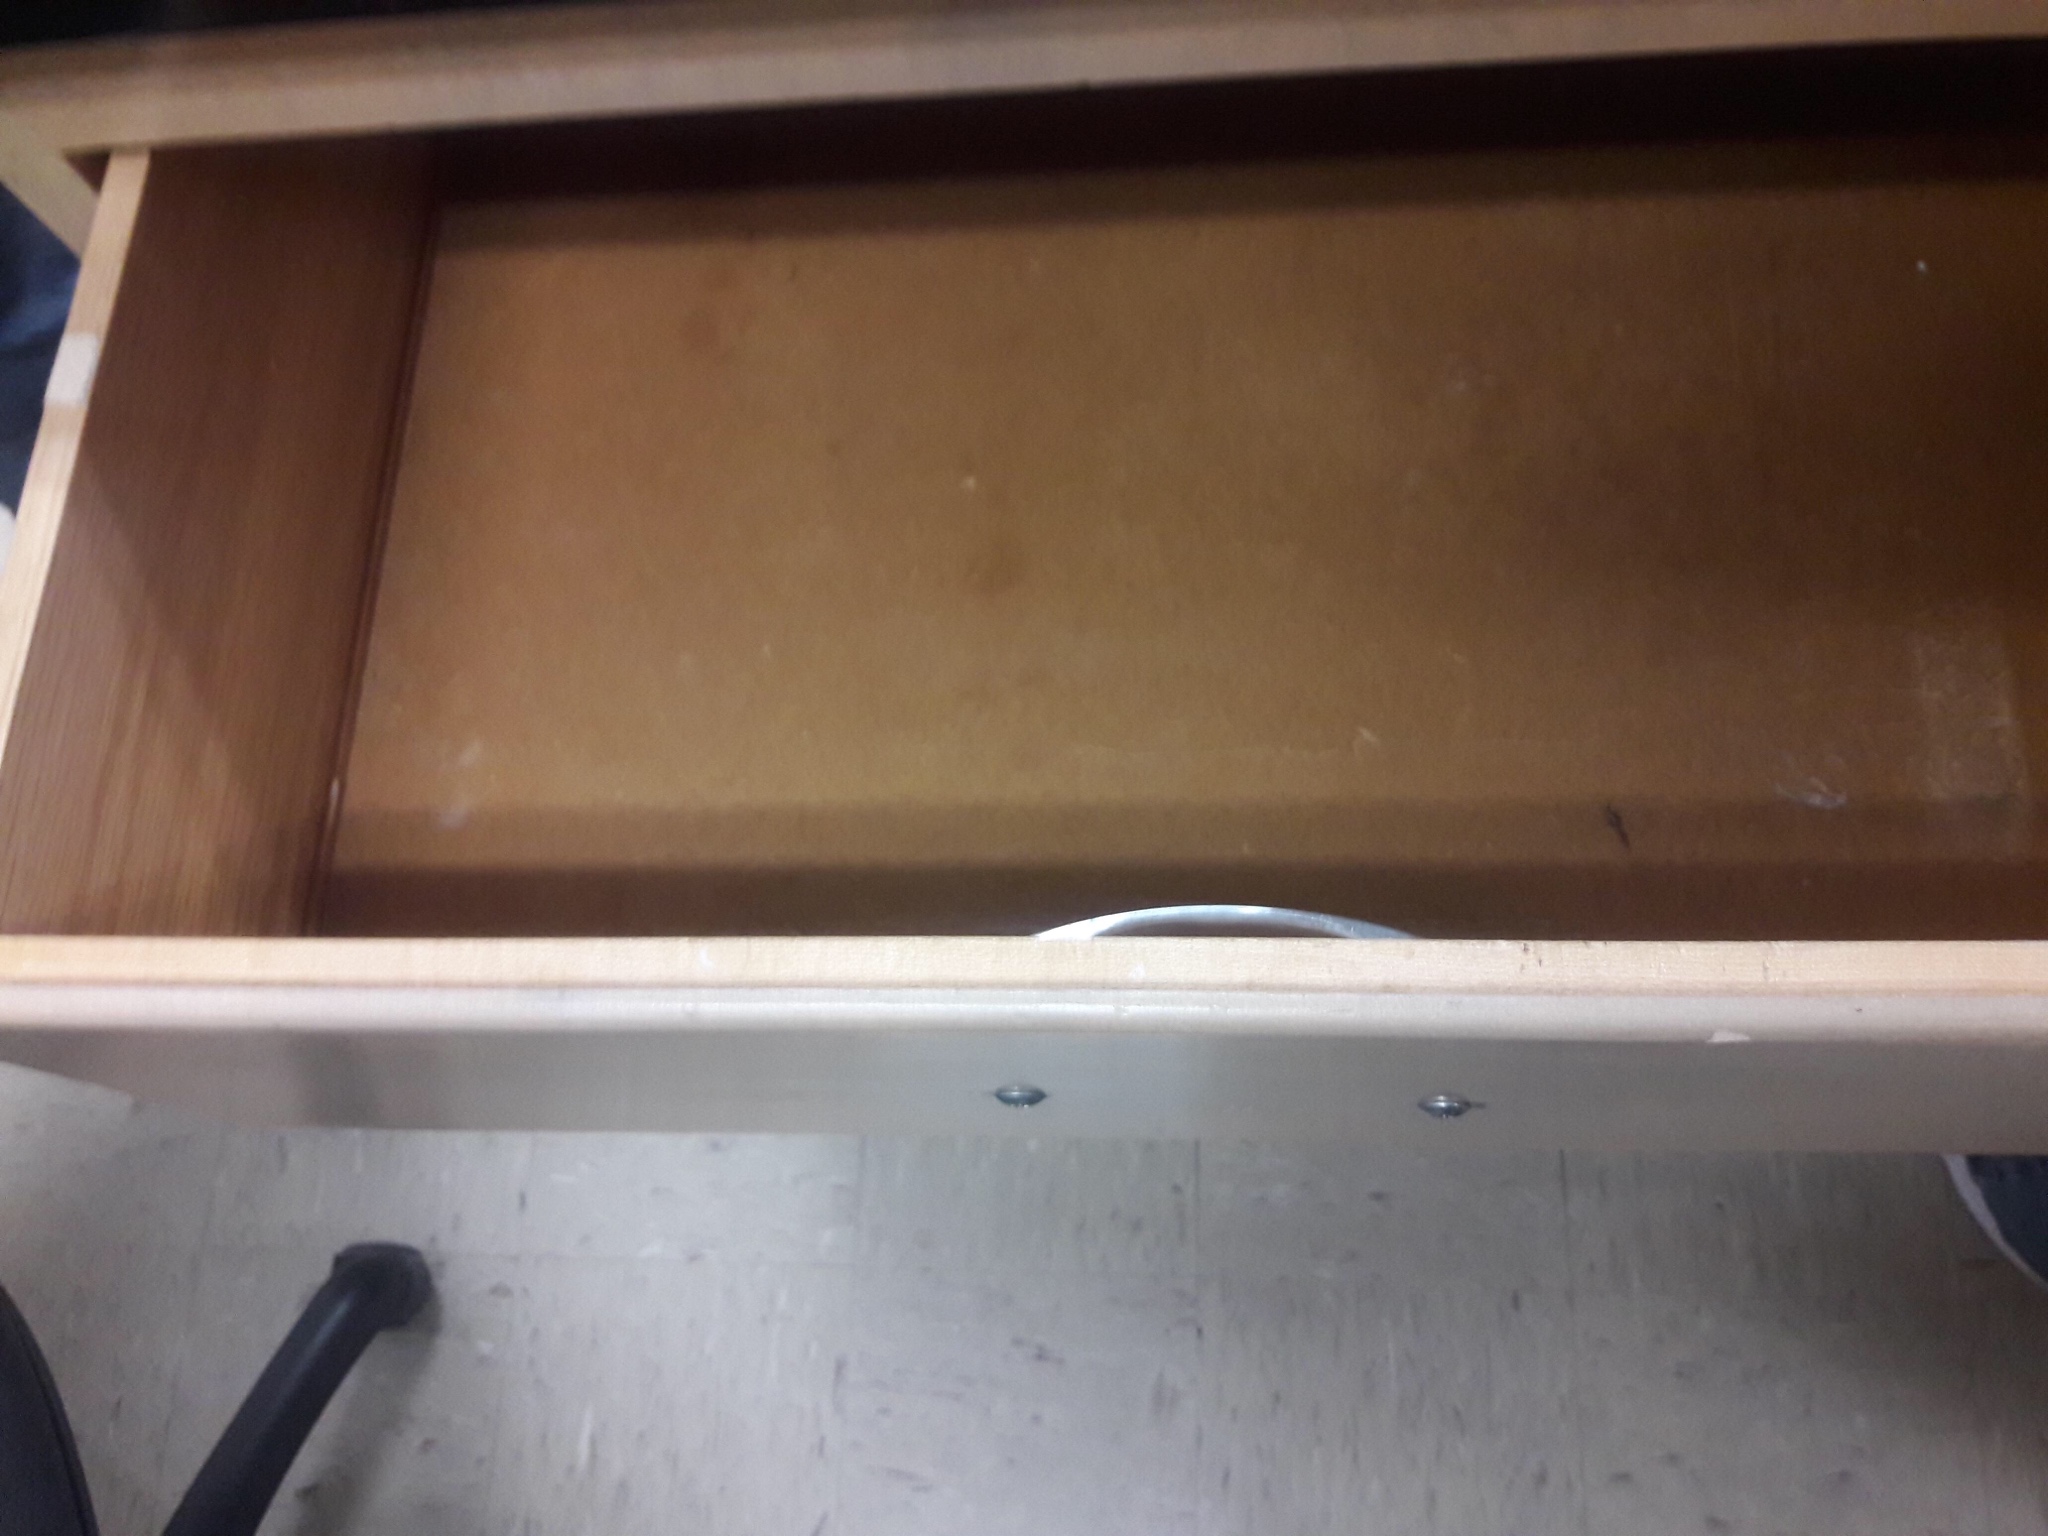 cursed drawer that has handle on the inside